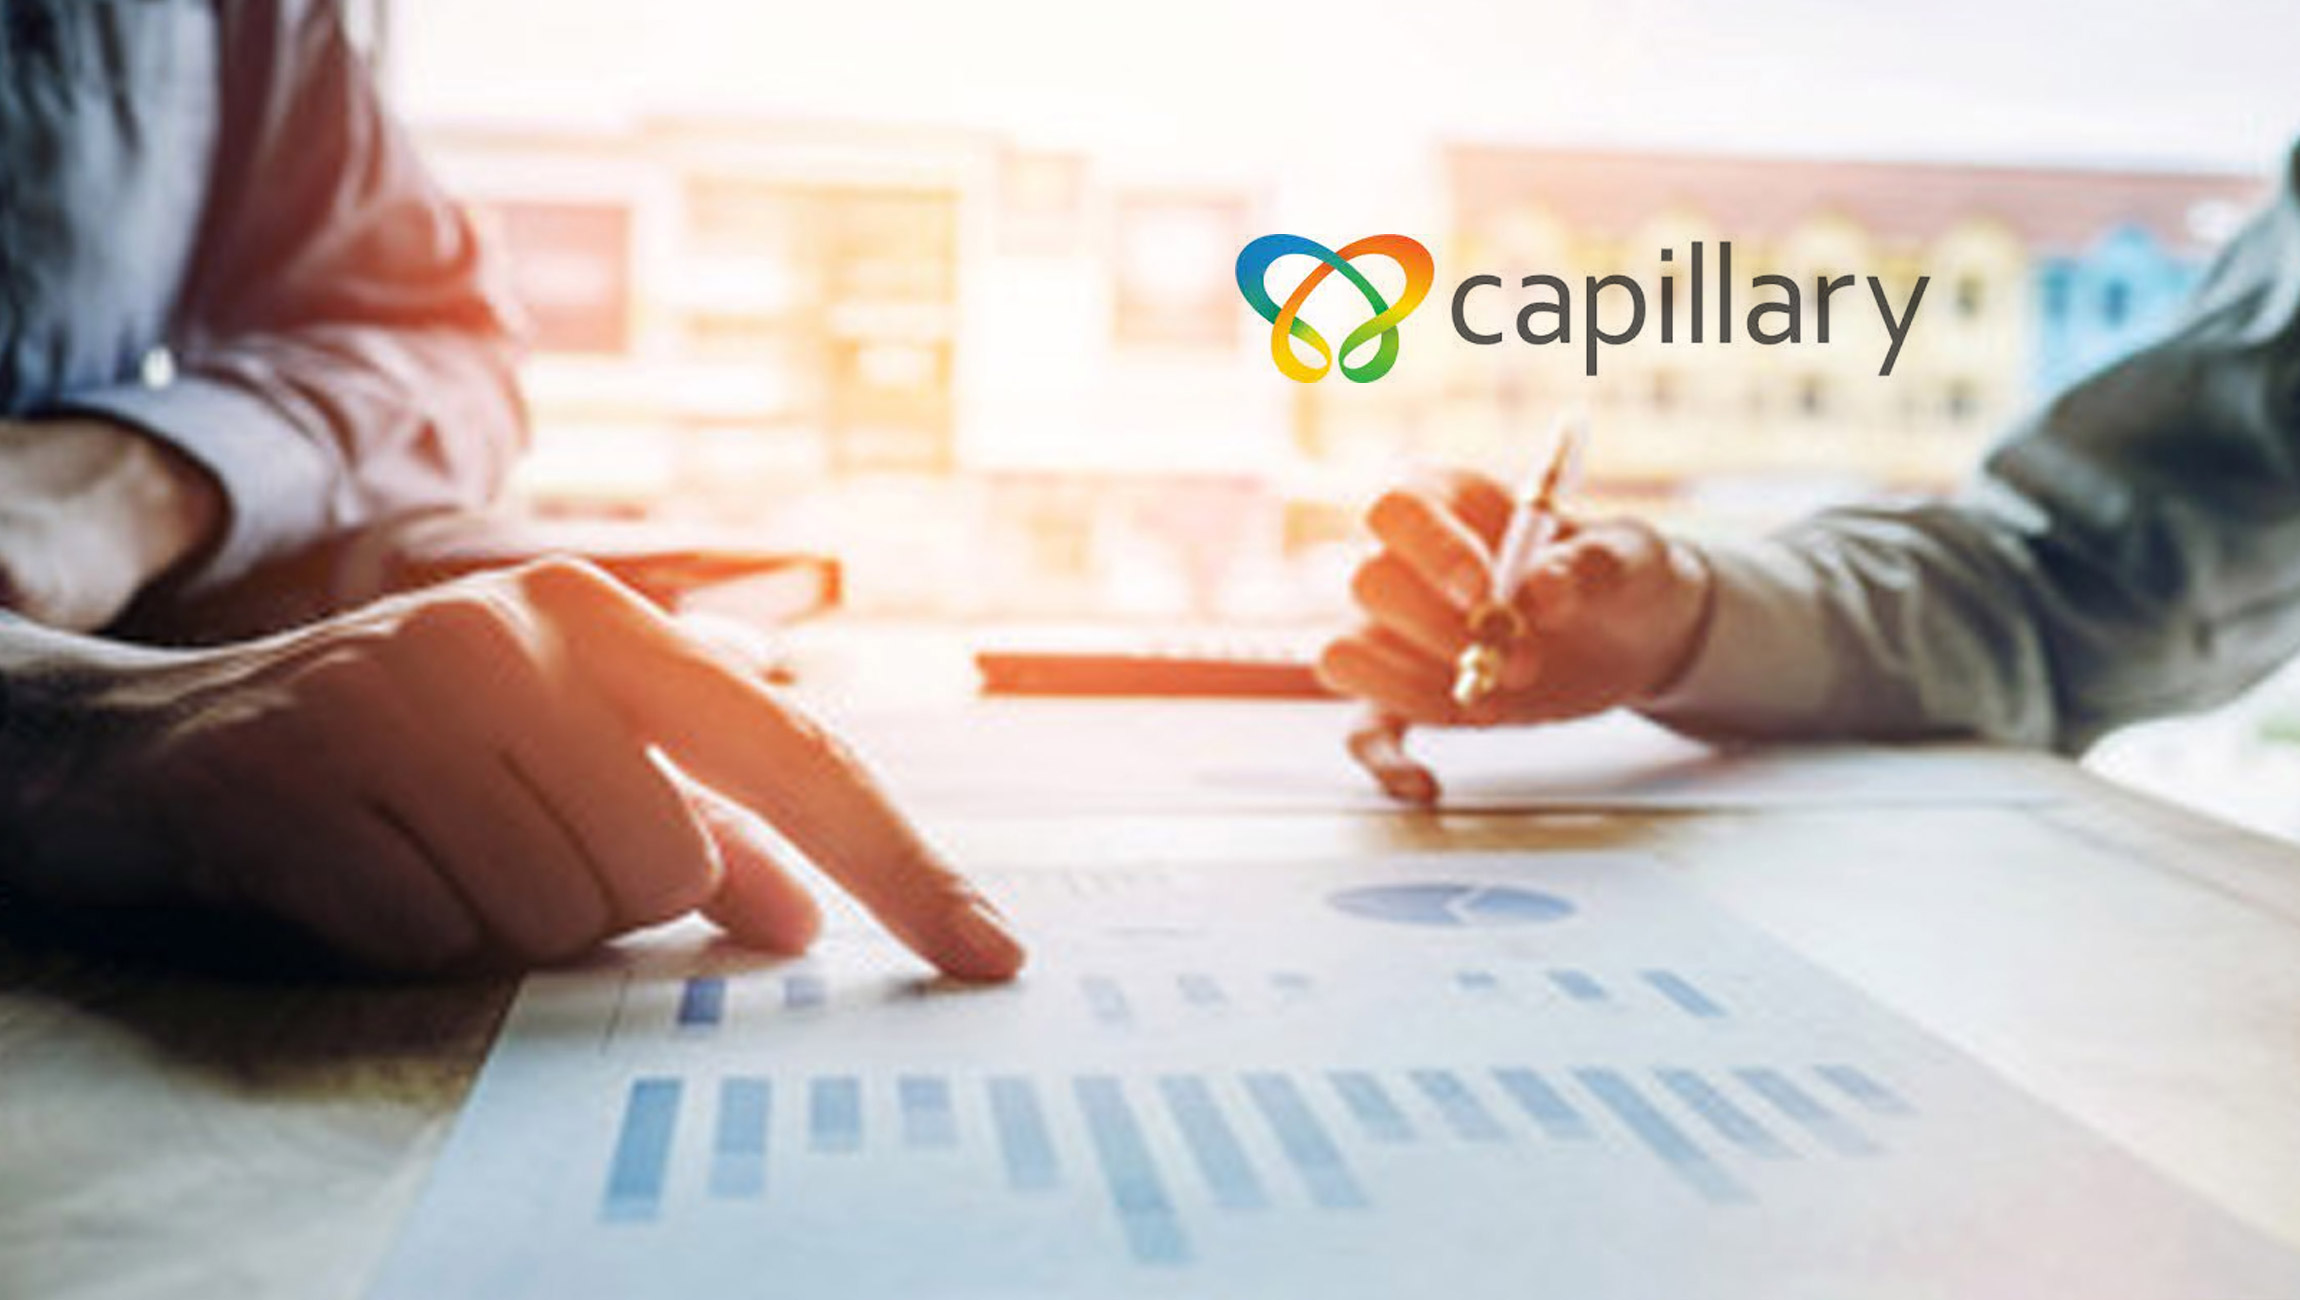 Capillary Named a Leader in Channel Incentive Management in 2022 Report by a Top Independent Research Firm